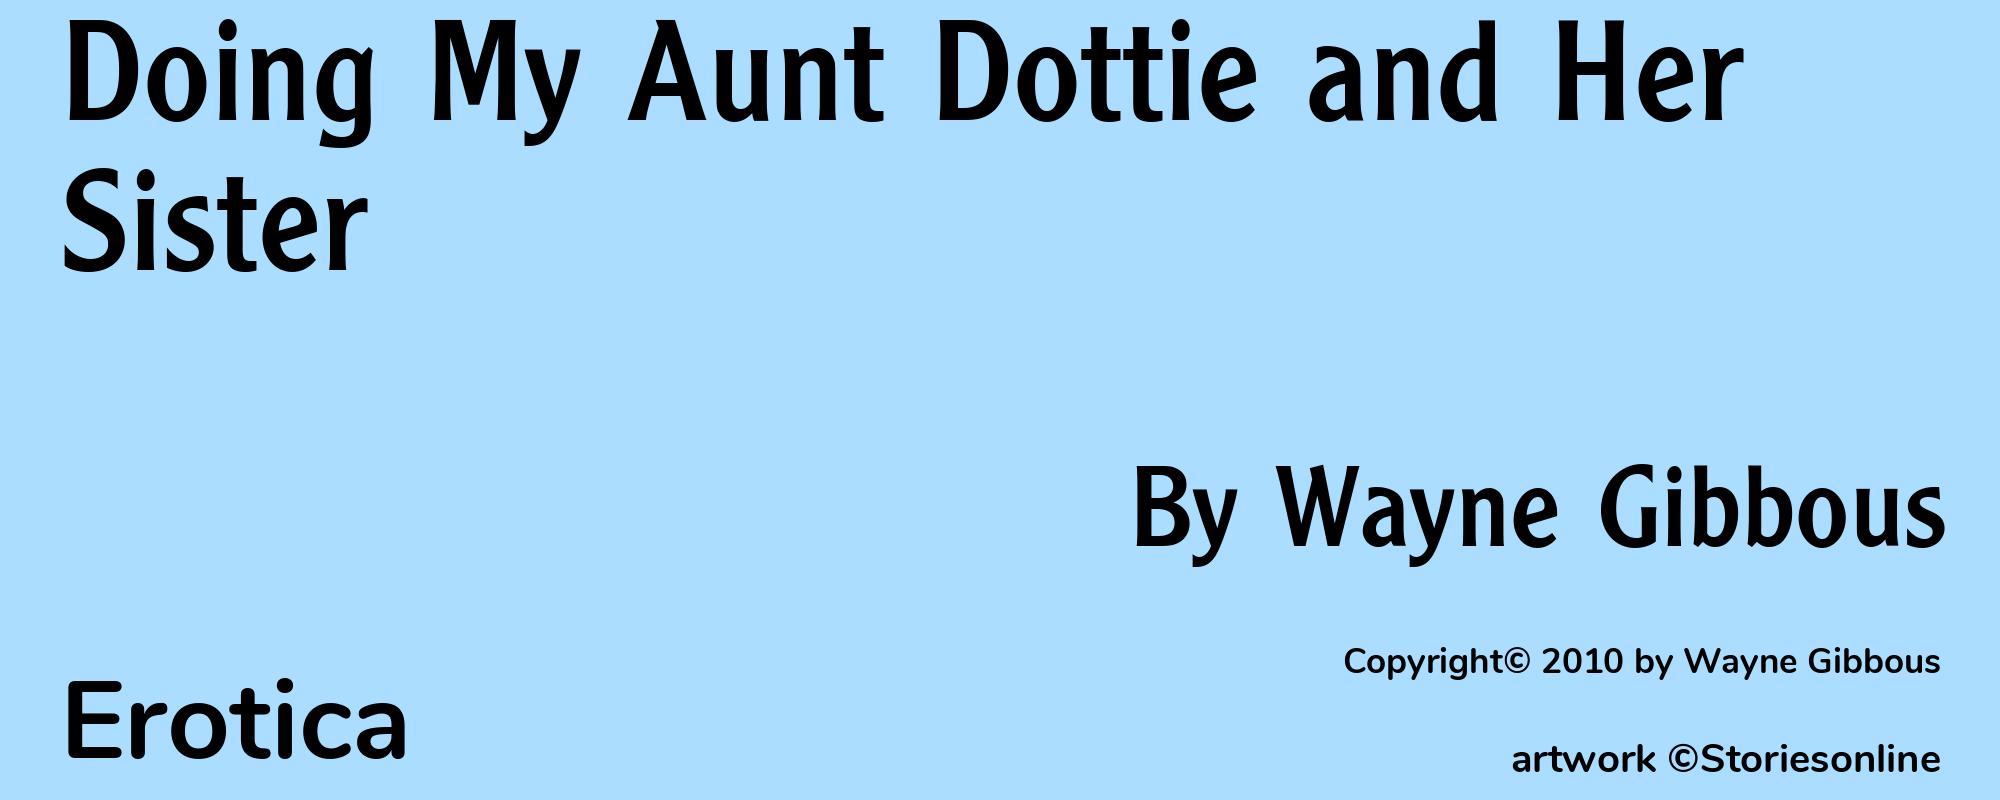 Doing My Aunt Dottie and Her Sister - Cover